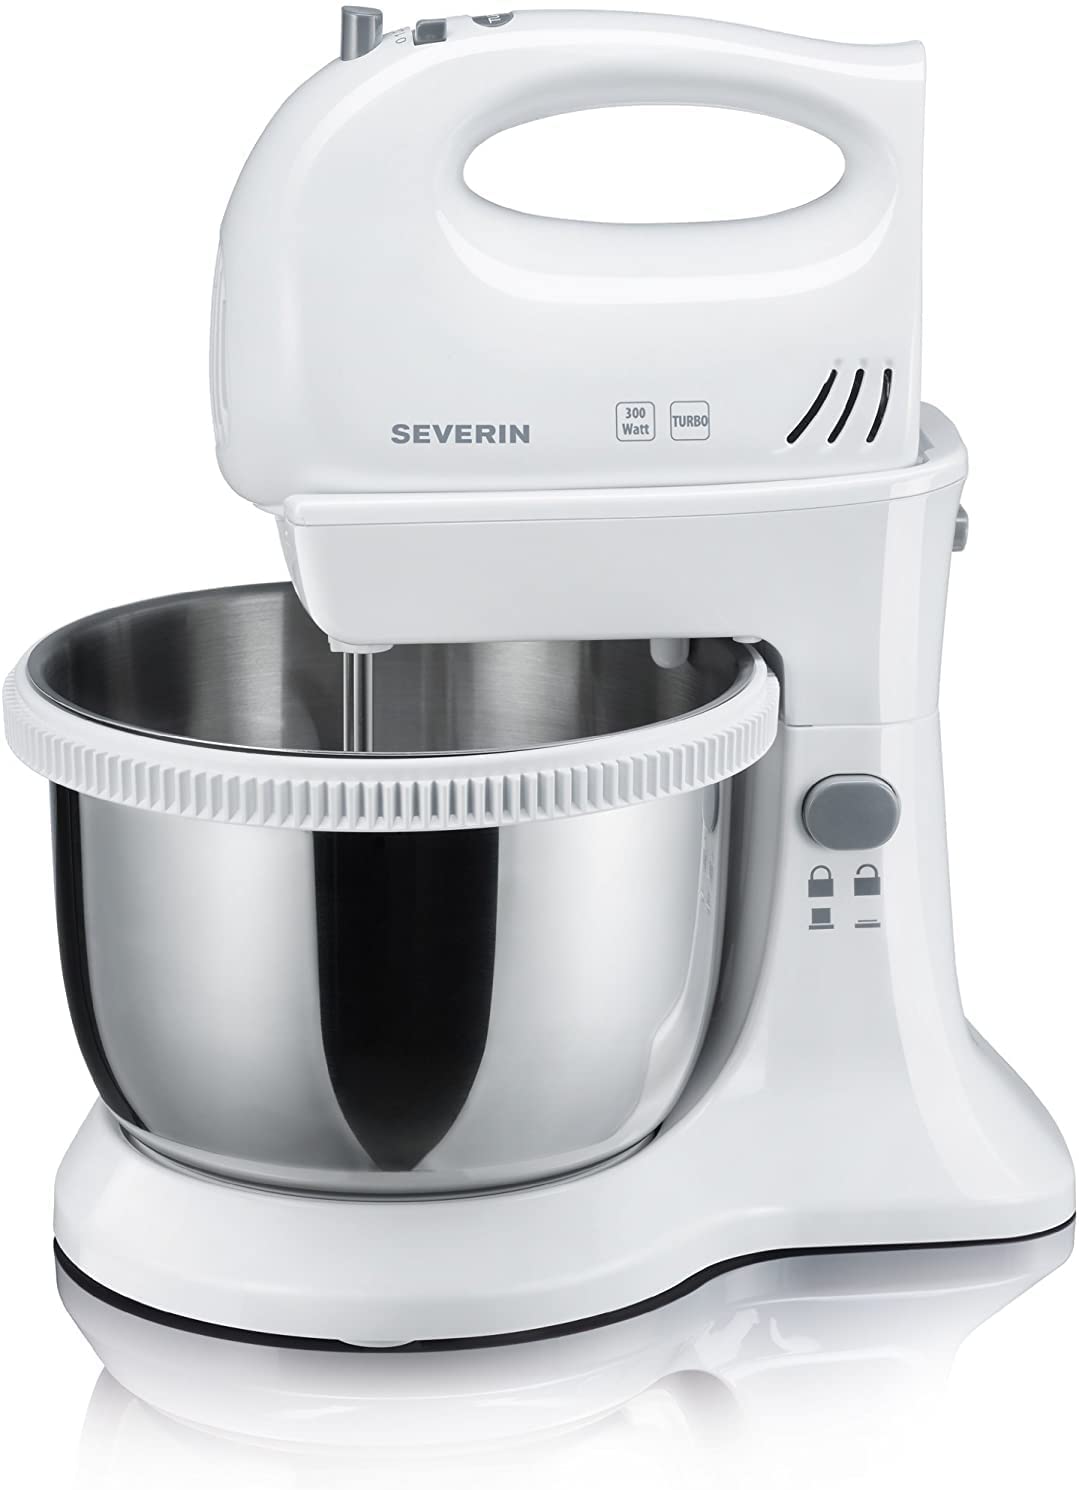 SEVERIN HM 3816 Hand Mixer Set, Approx. 300 W, Includes Table Stand and 3 L Mixing Bowl, Stainless Steel/White